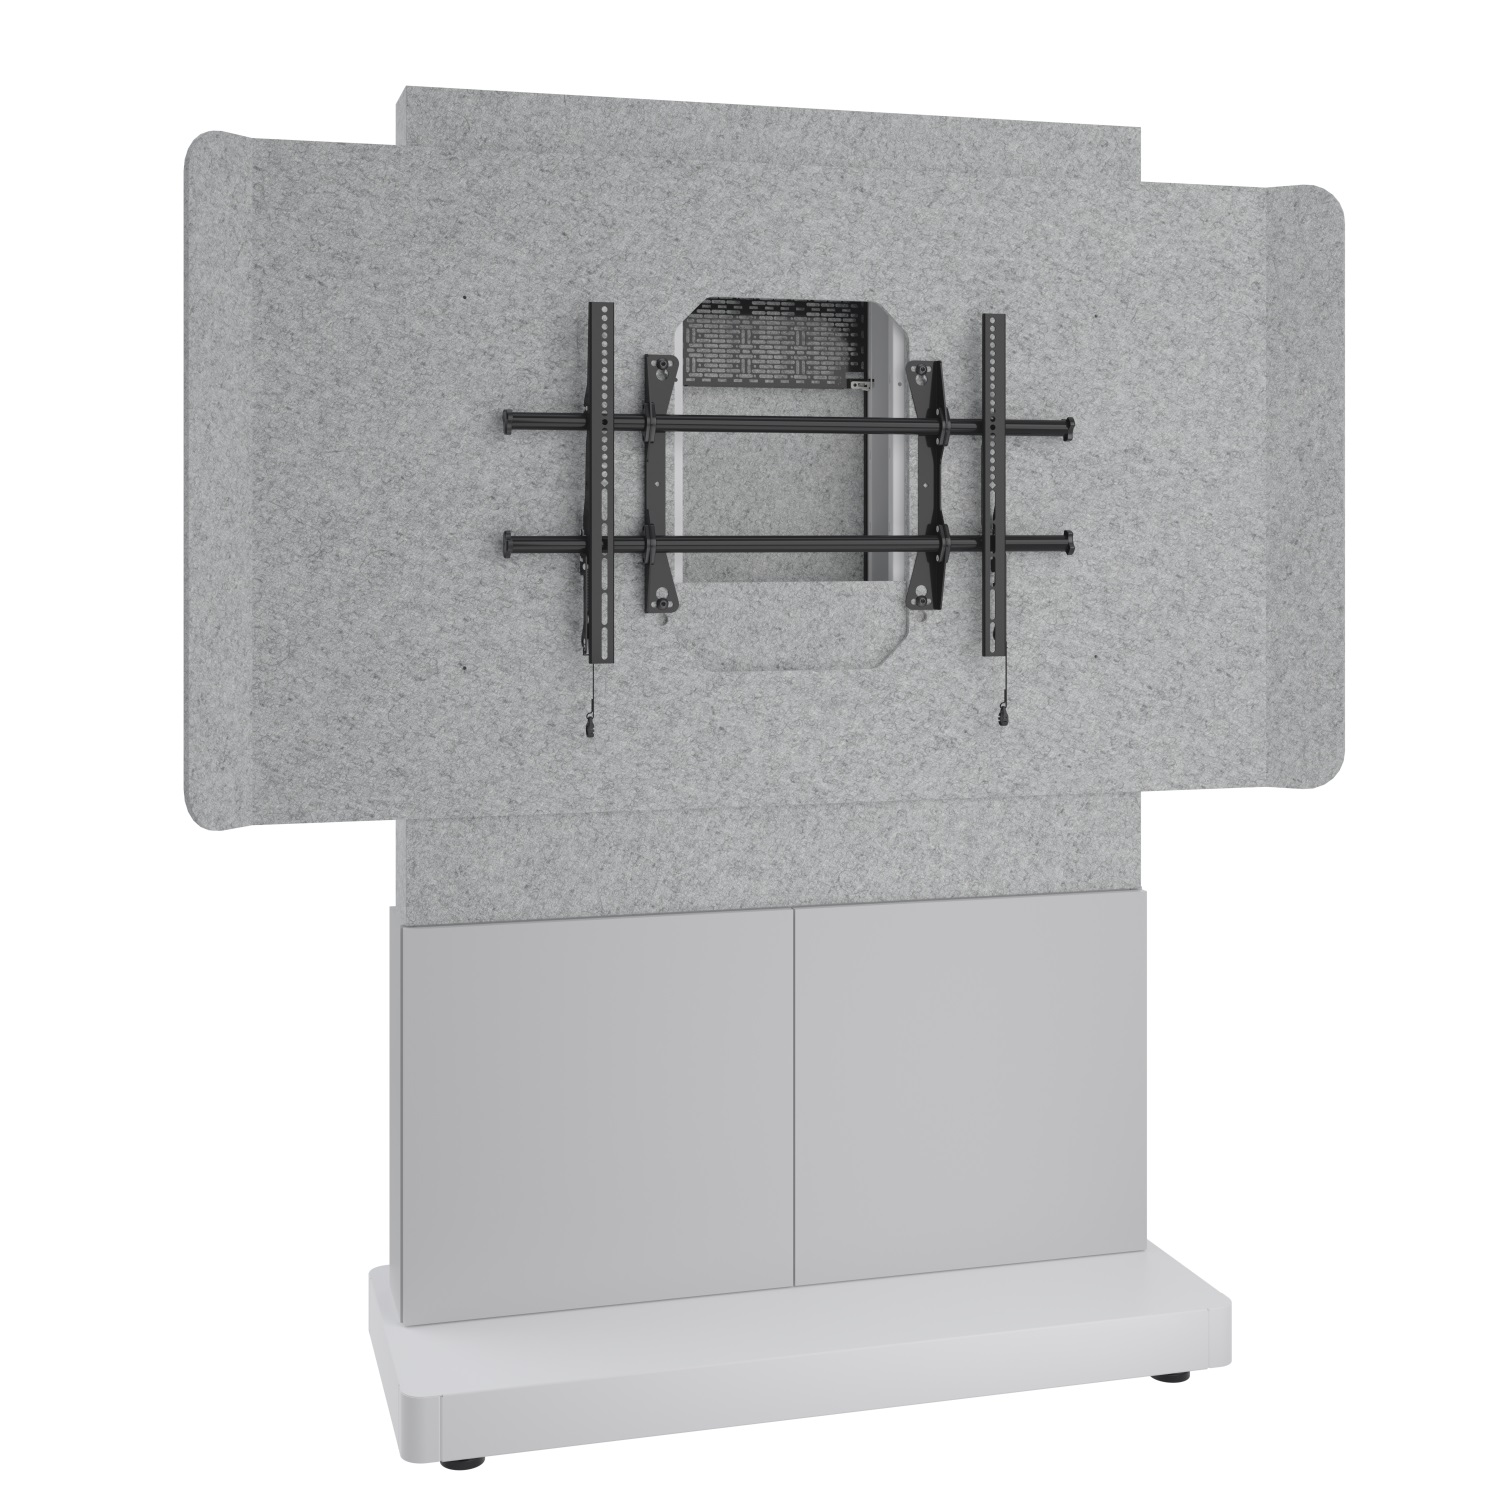 Forum 48 inch display stand